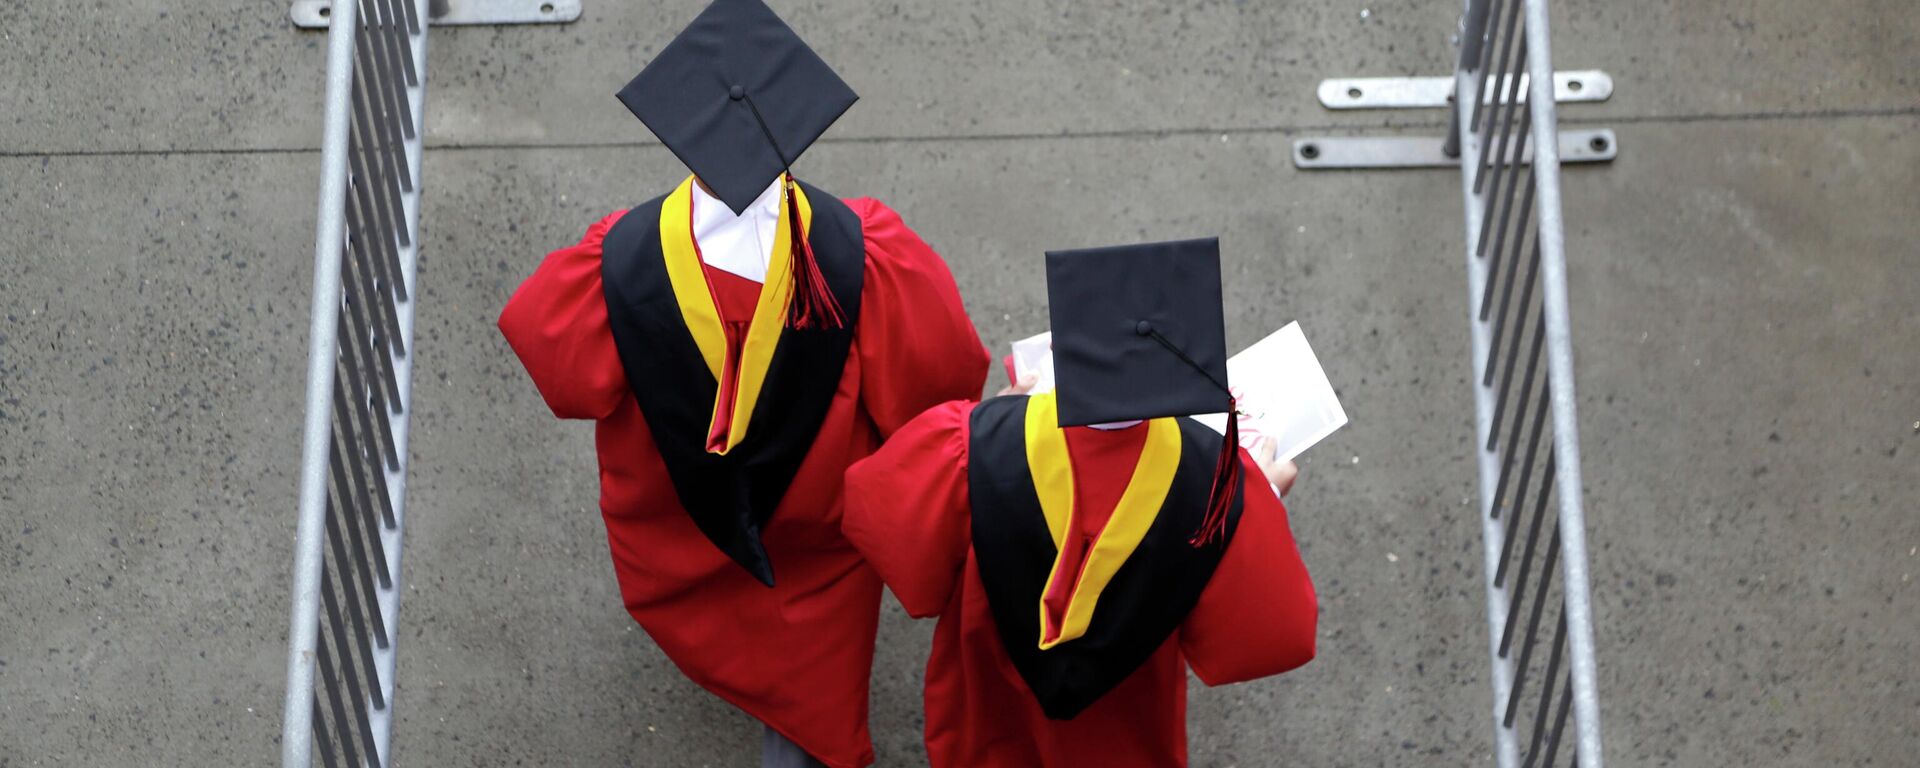 FILE - New graduates walk into the High Point Solutions Stadium before the start of the Rutgers University graduation ceremony in Piscataway Township, N.J., on May 13, 2018 - Sputnik International, 1920, 27.08.2022